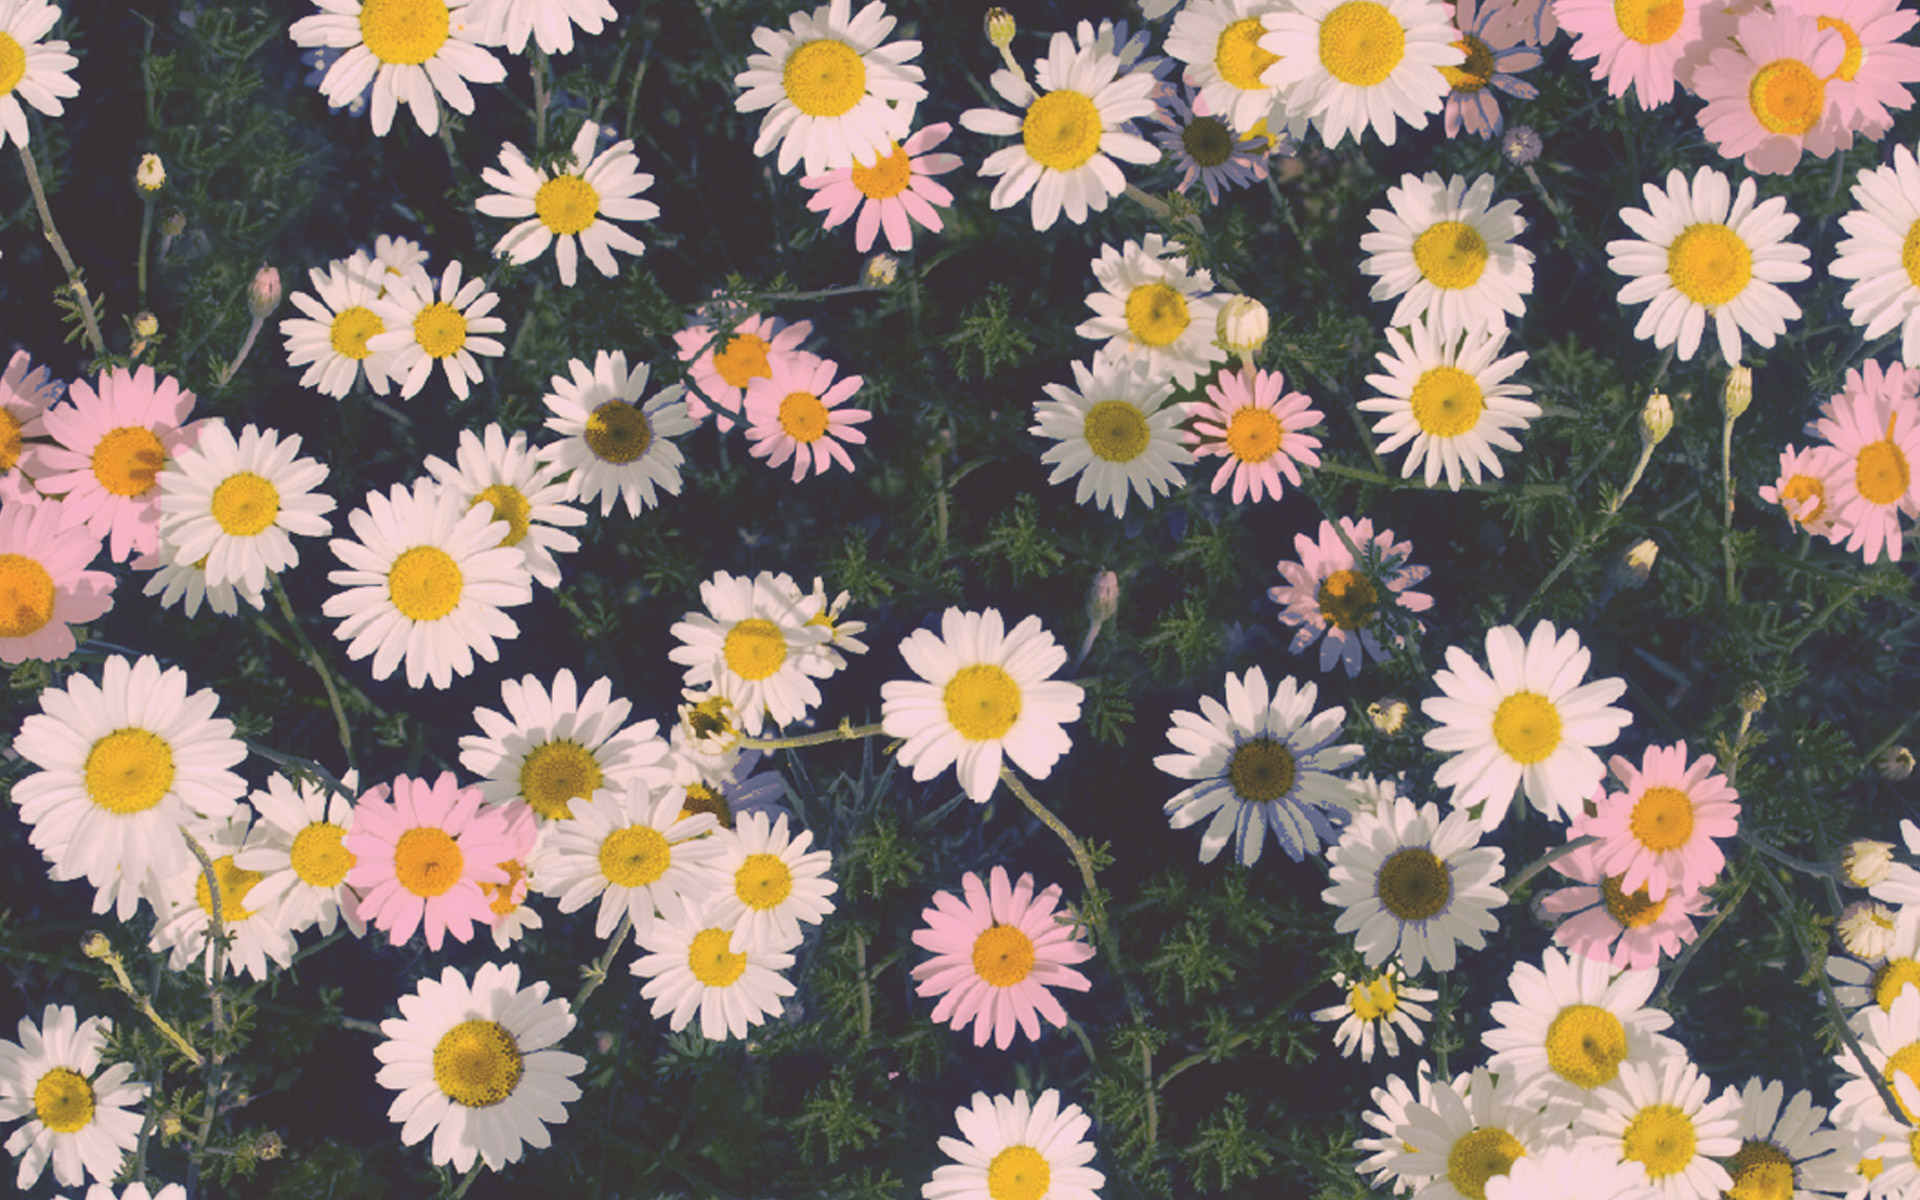 daisy hd images download with amazing background images download